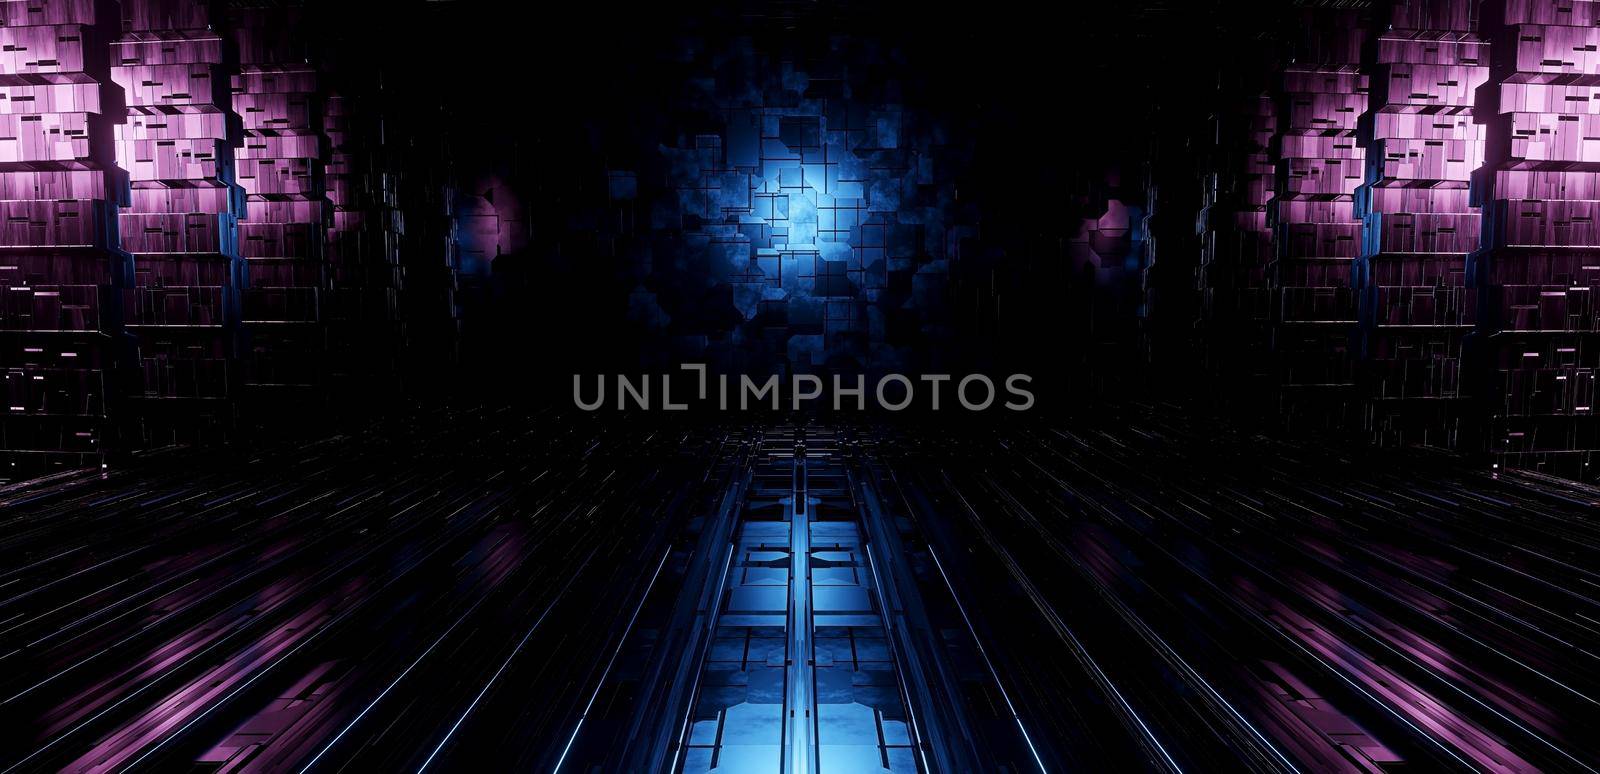 Empty Futuristic Metallic Pillars And Floor Dark Black Illustrative Banner Background Wallpaper Space Age Concept For Product Backgrounds Presentation 3D Rendering by yay_lmrb